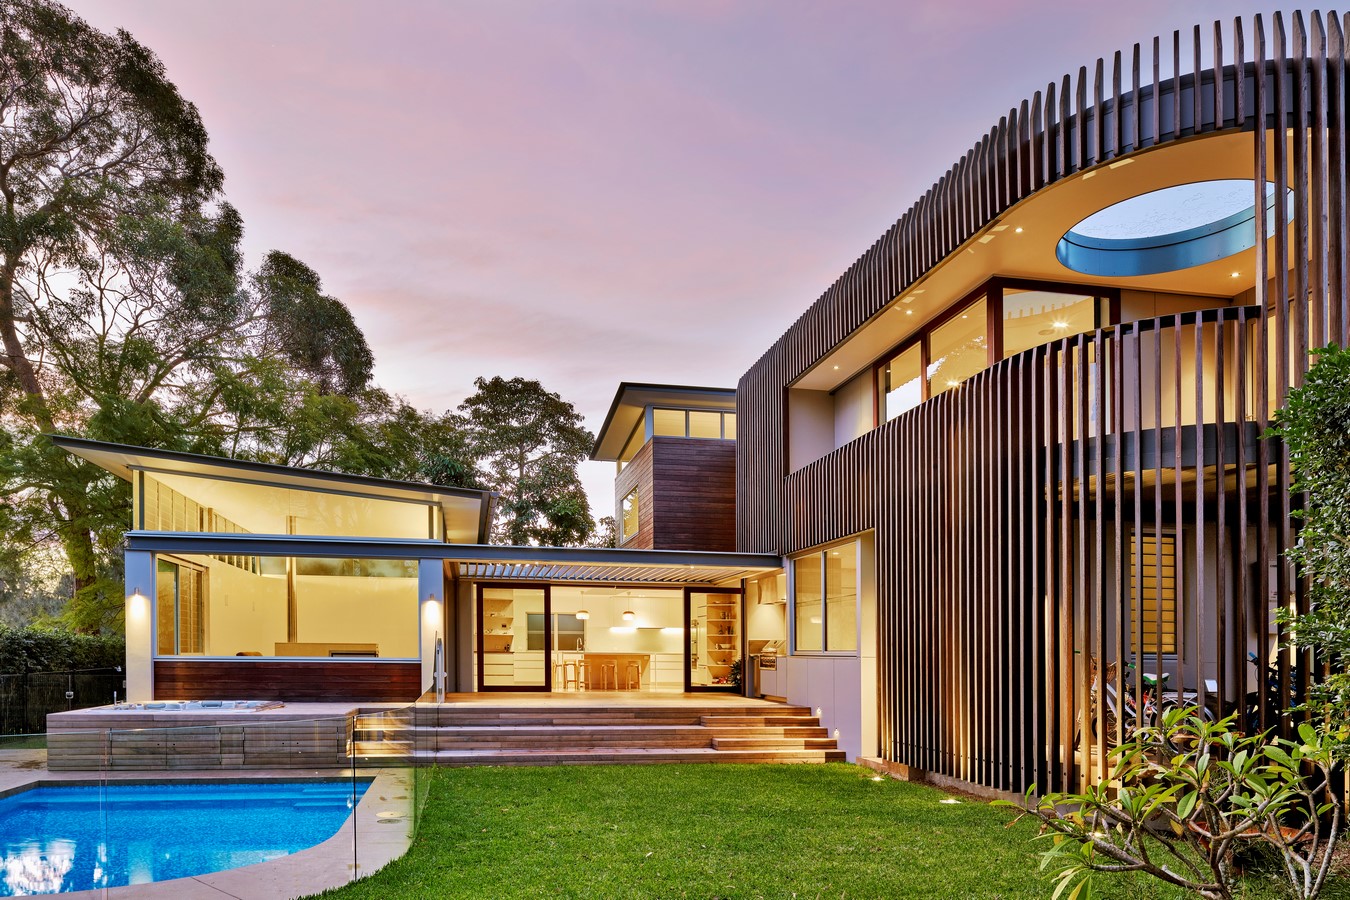  Lagoon House by Utz-Sanby Architects - Sheet1